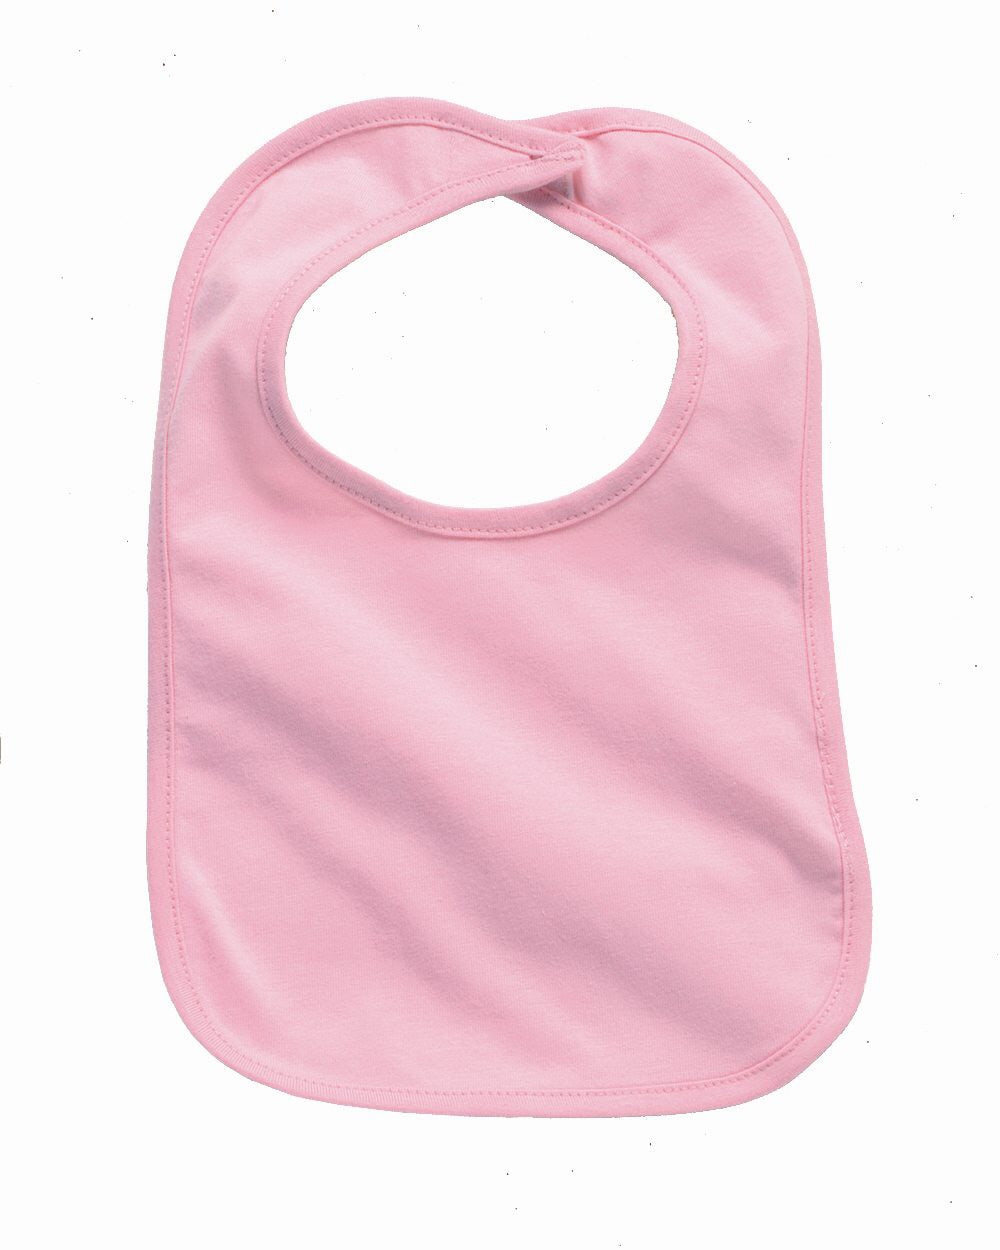 Soft cotton bib trimmed in white with velcro closure.  Great for monogramming ($6 additional fee).